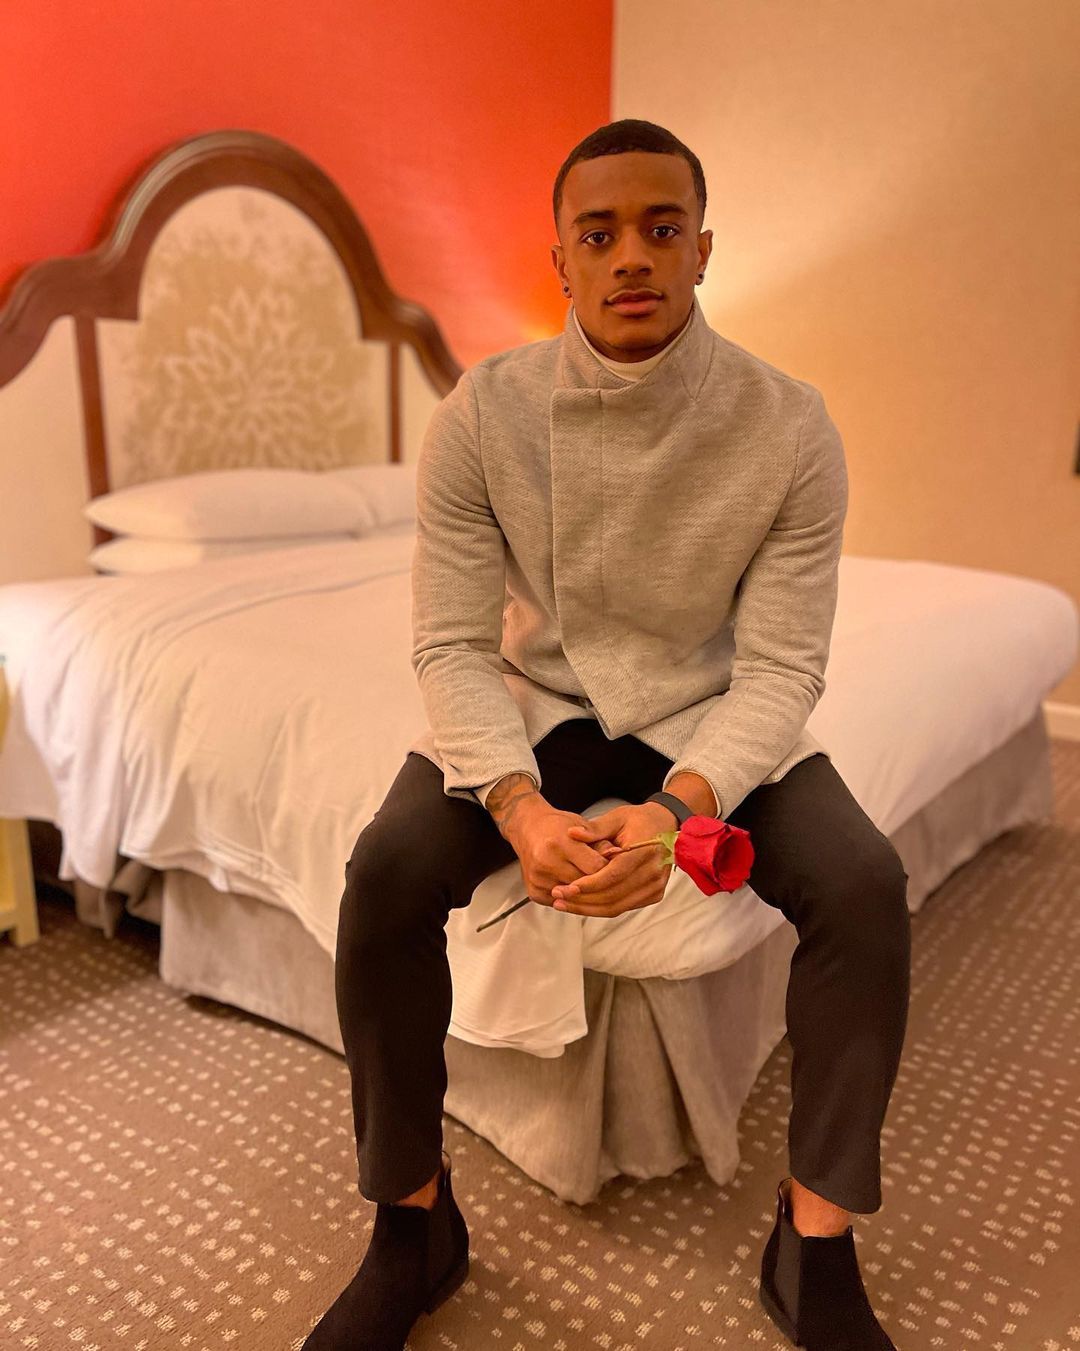 Patrick Surtain II casually sitting on a bed holding a long stem red rose.